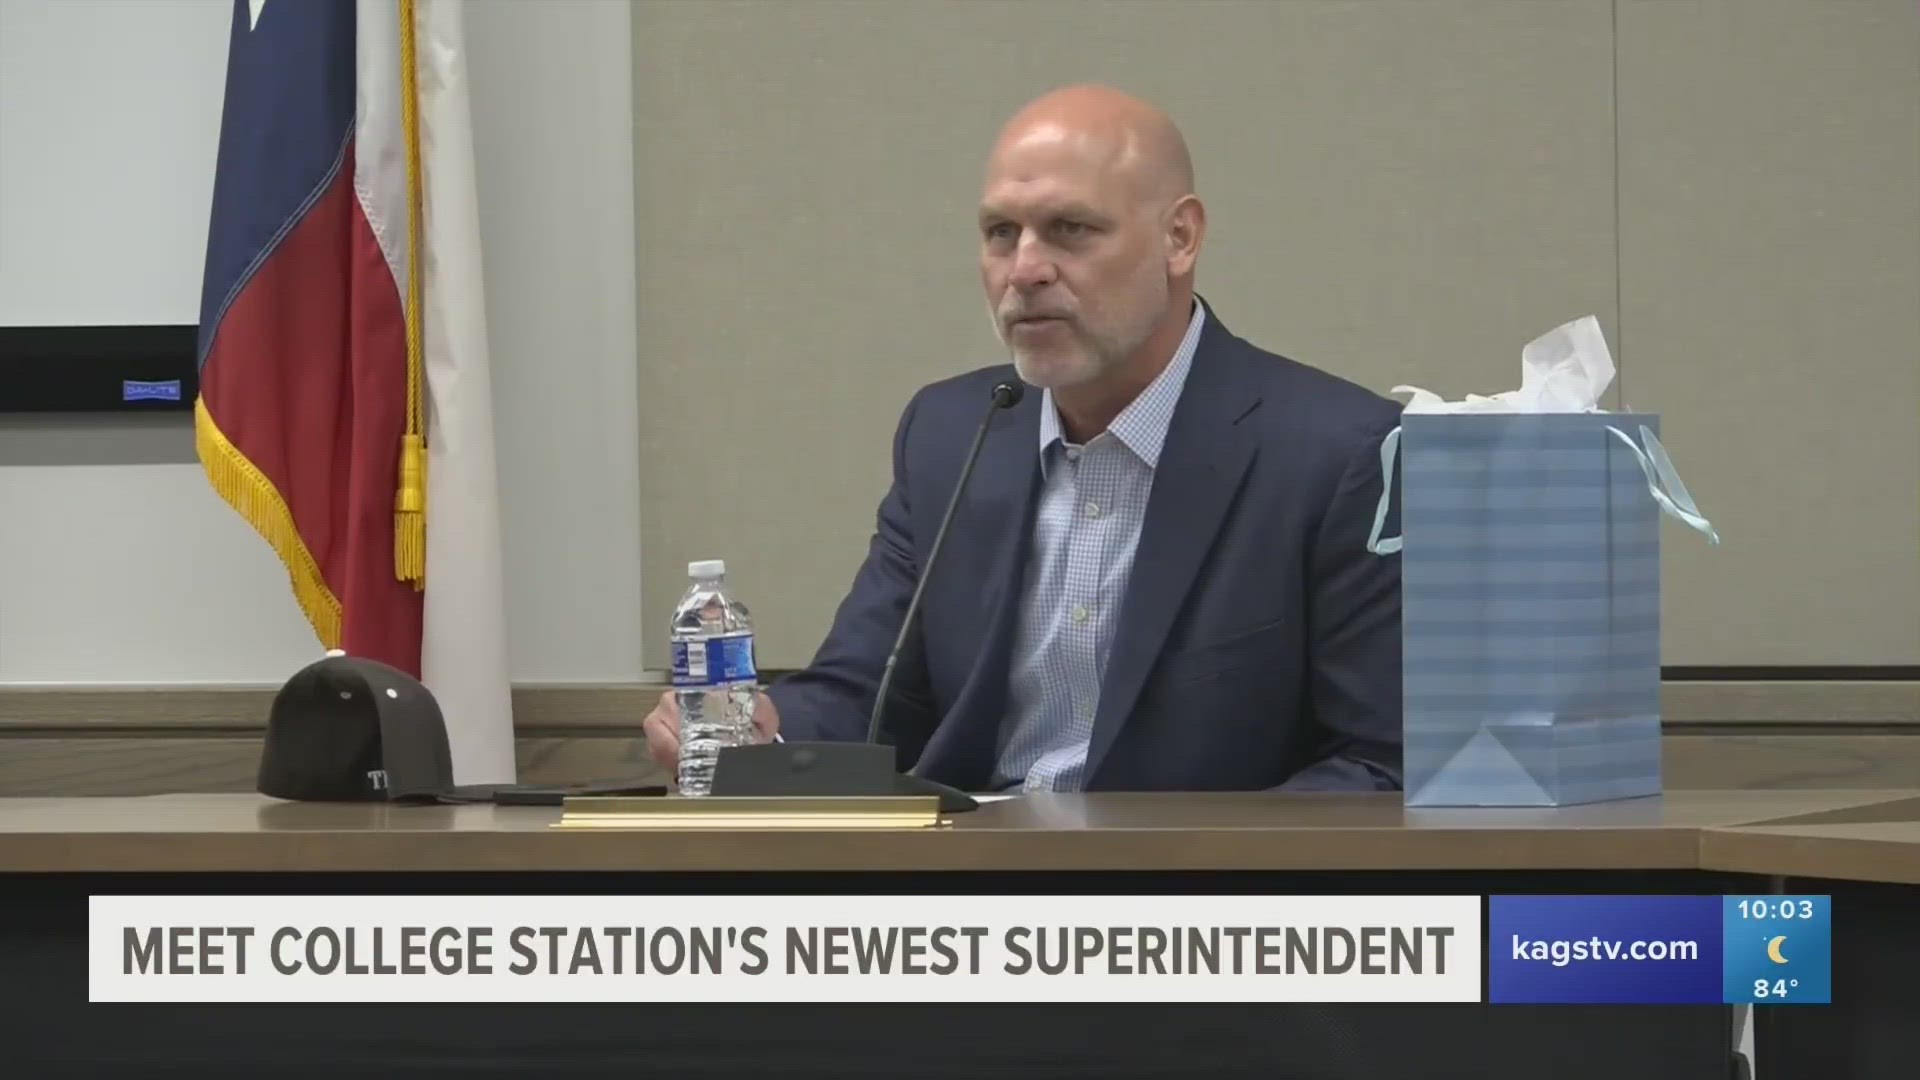 Thursday was the beginning of a new era at College Station ISD with the school board officially naming Tim Harkrider as its new superintendent.